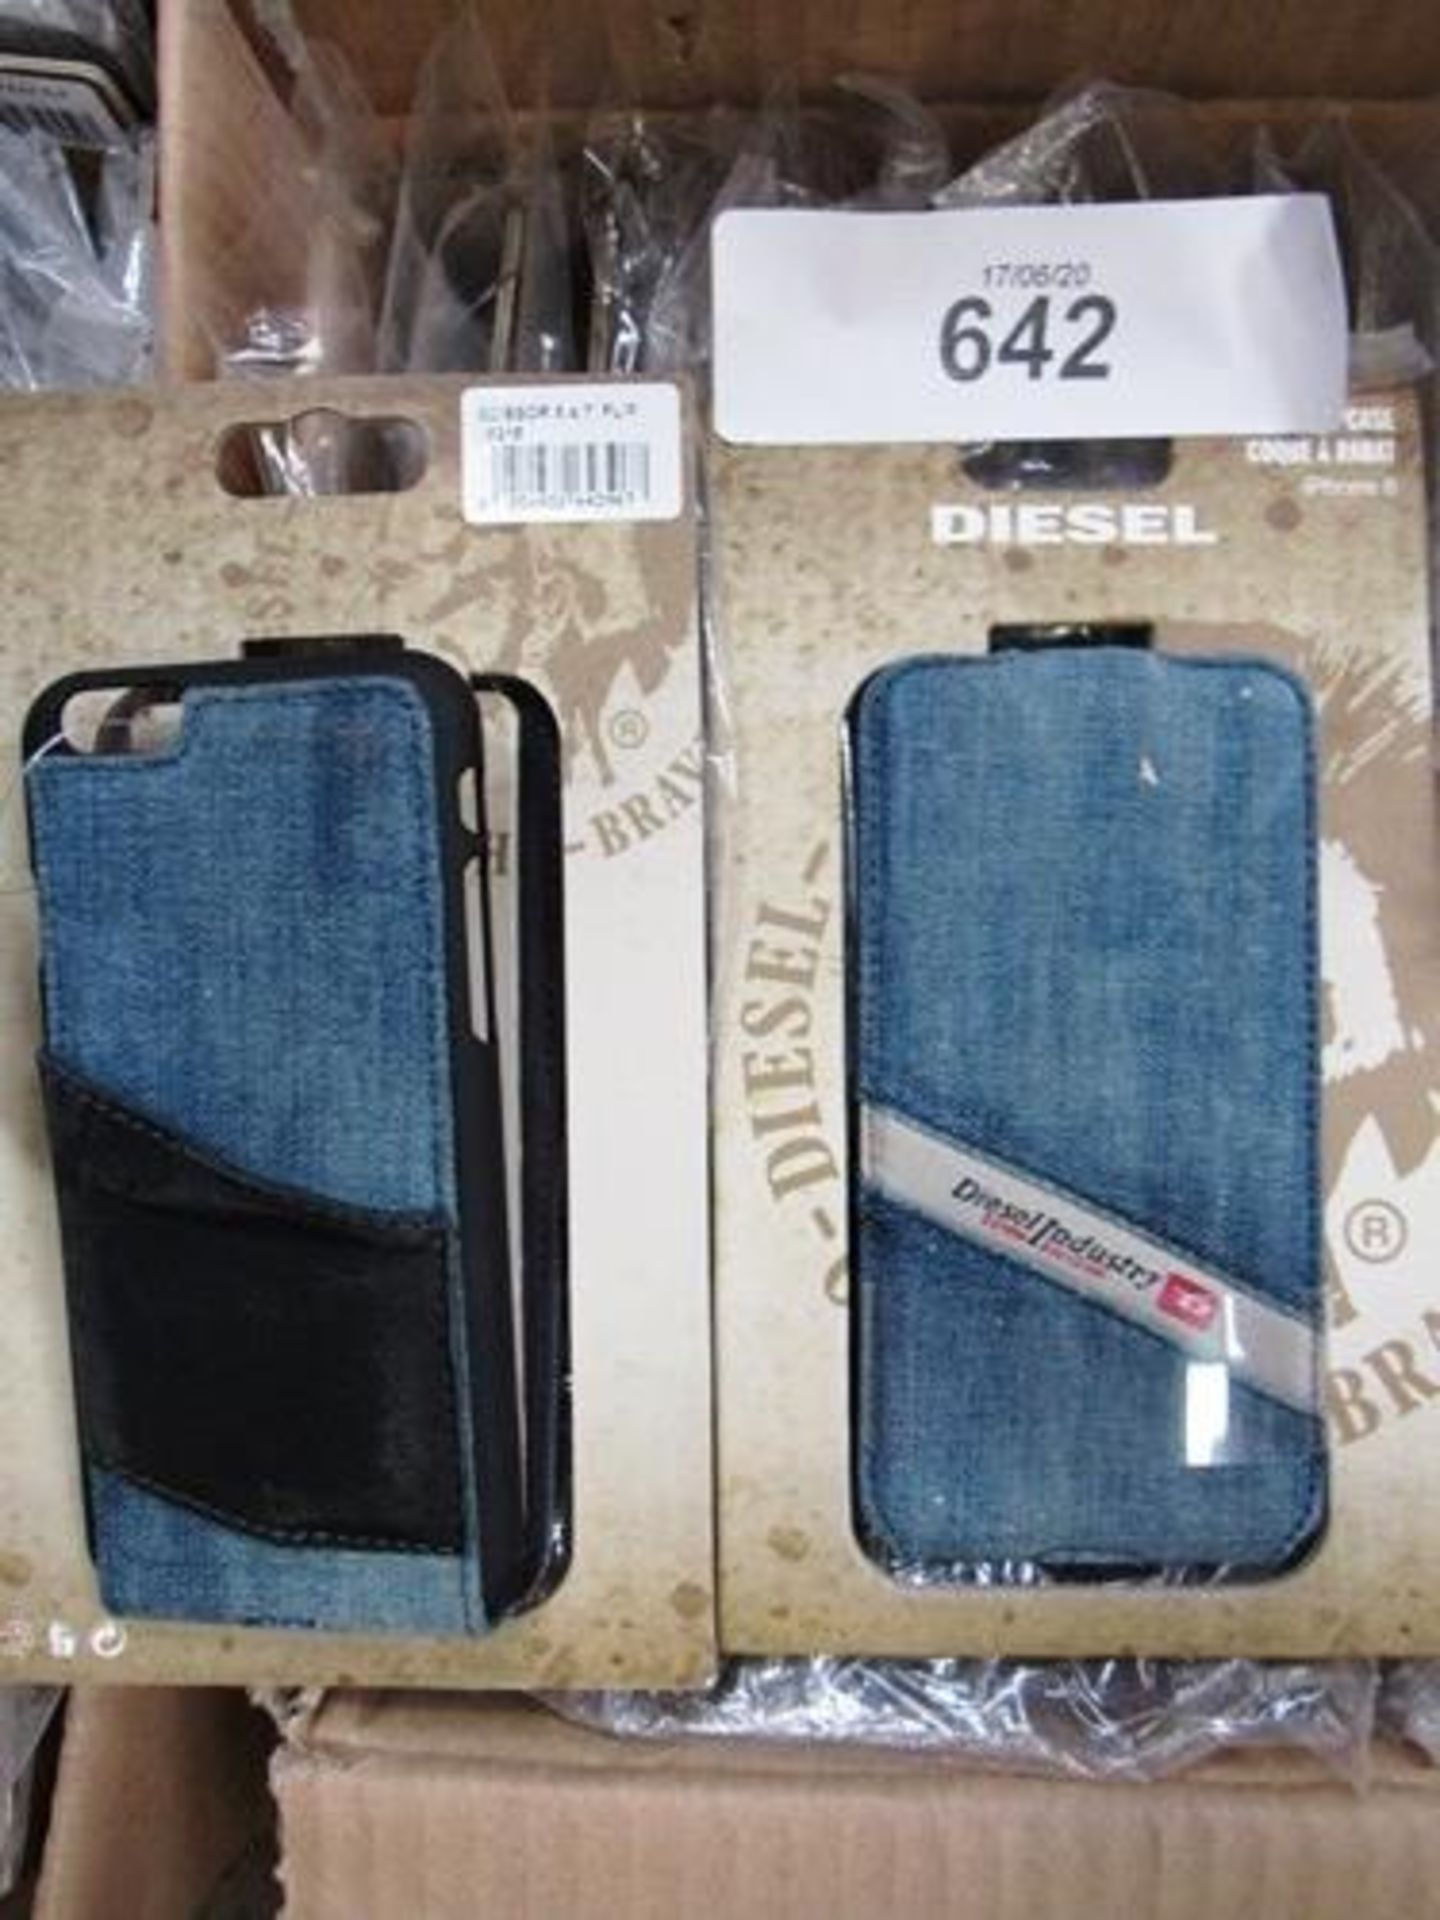 Approximately 60 x Diesel denim iPhone 6 flip covers - New (GS40A) - Image 2 of 2